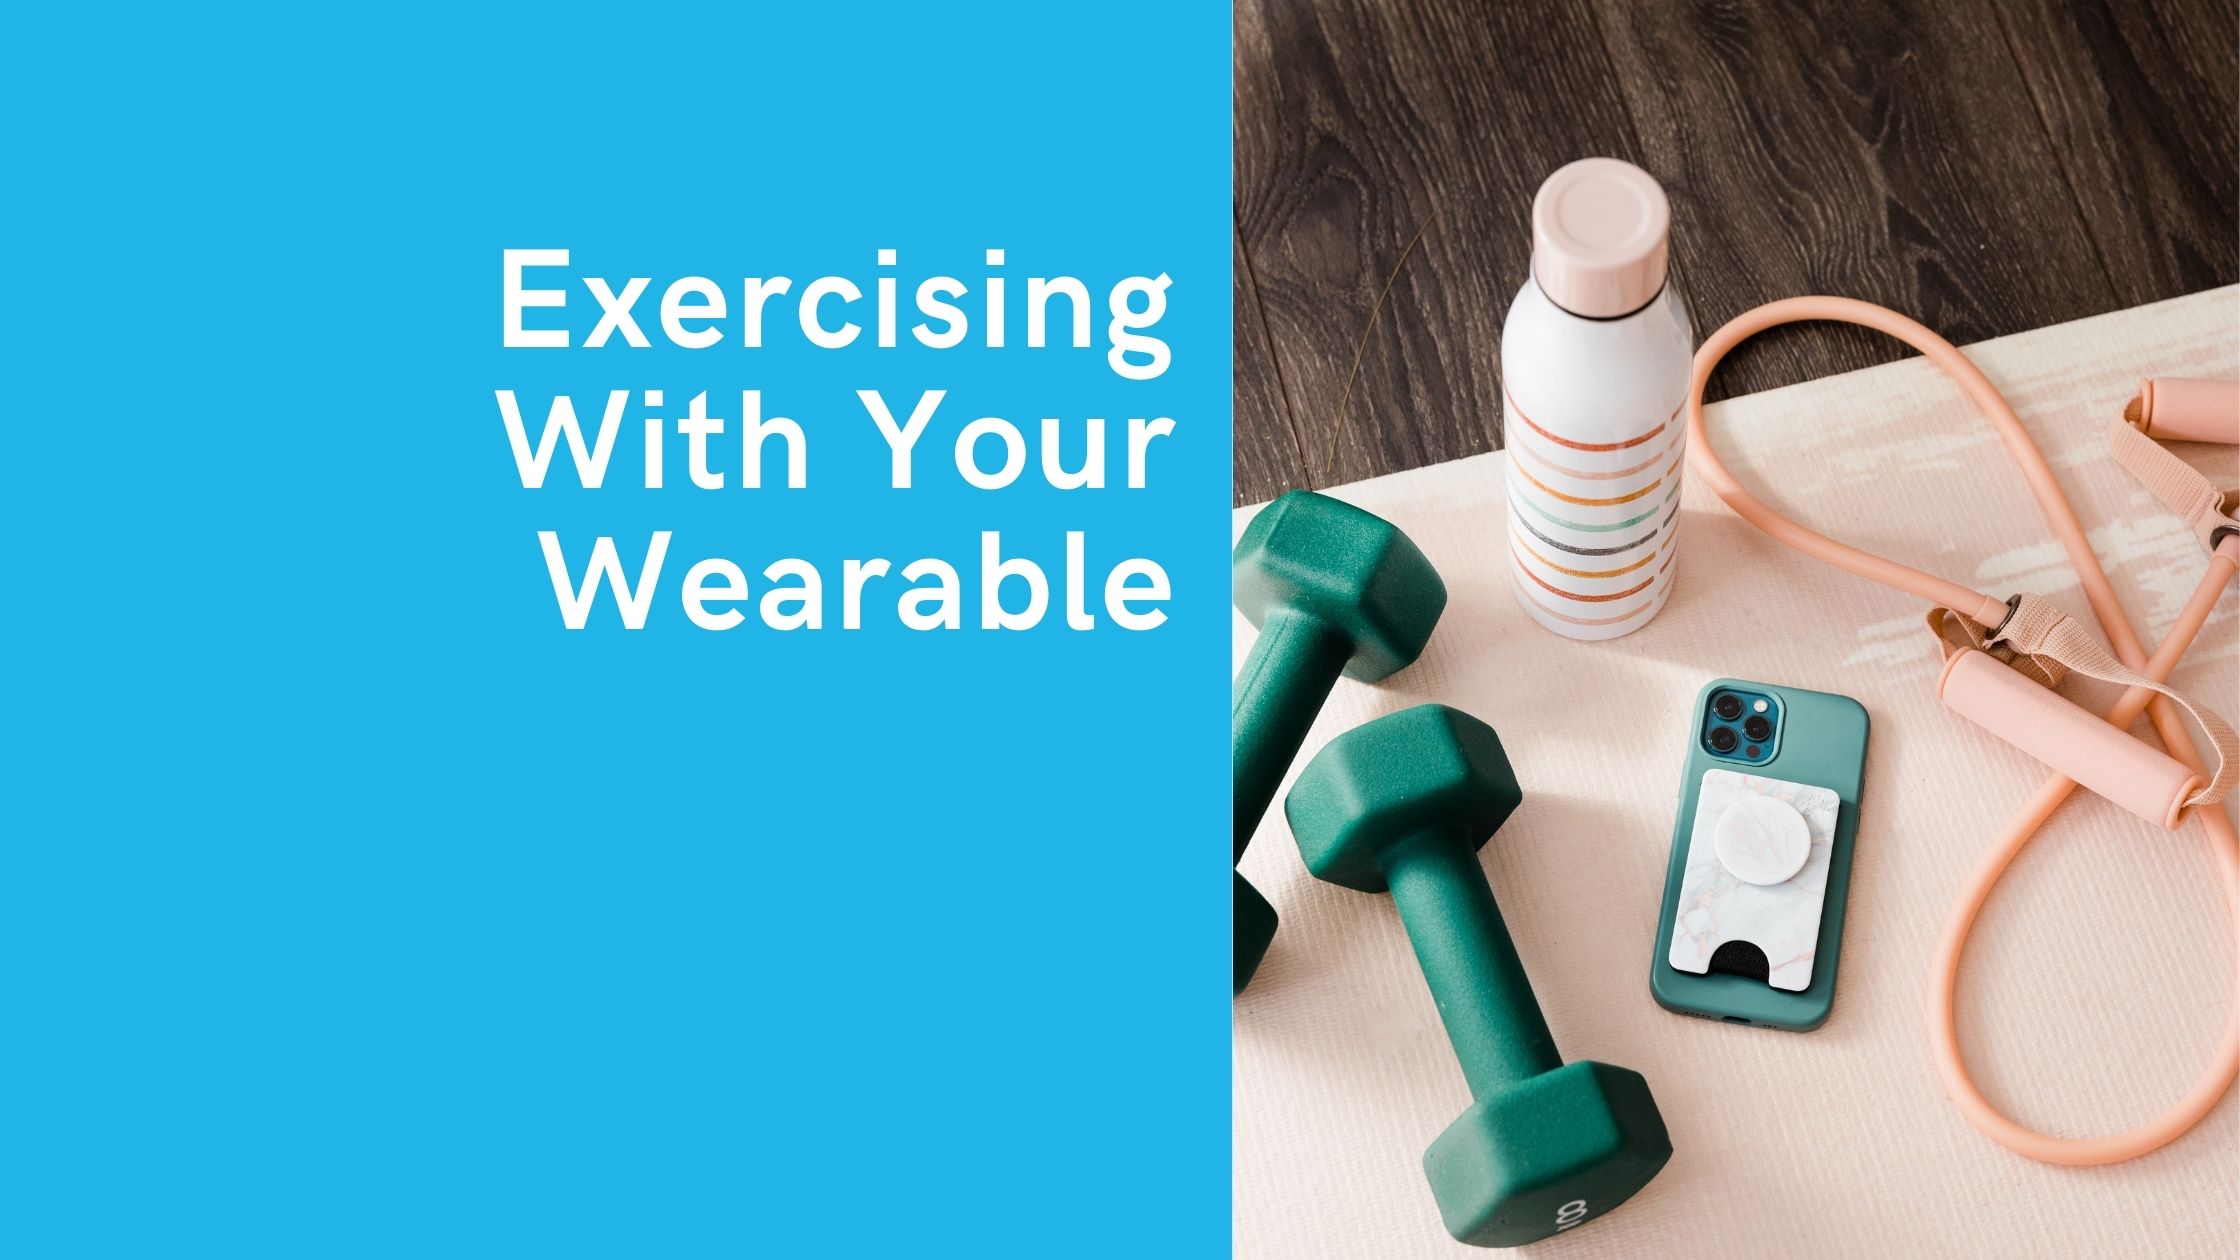 The Ultimate Guide to Exercising With Your Wearable